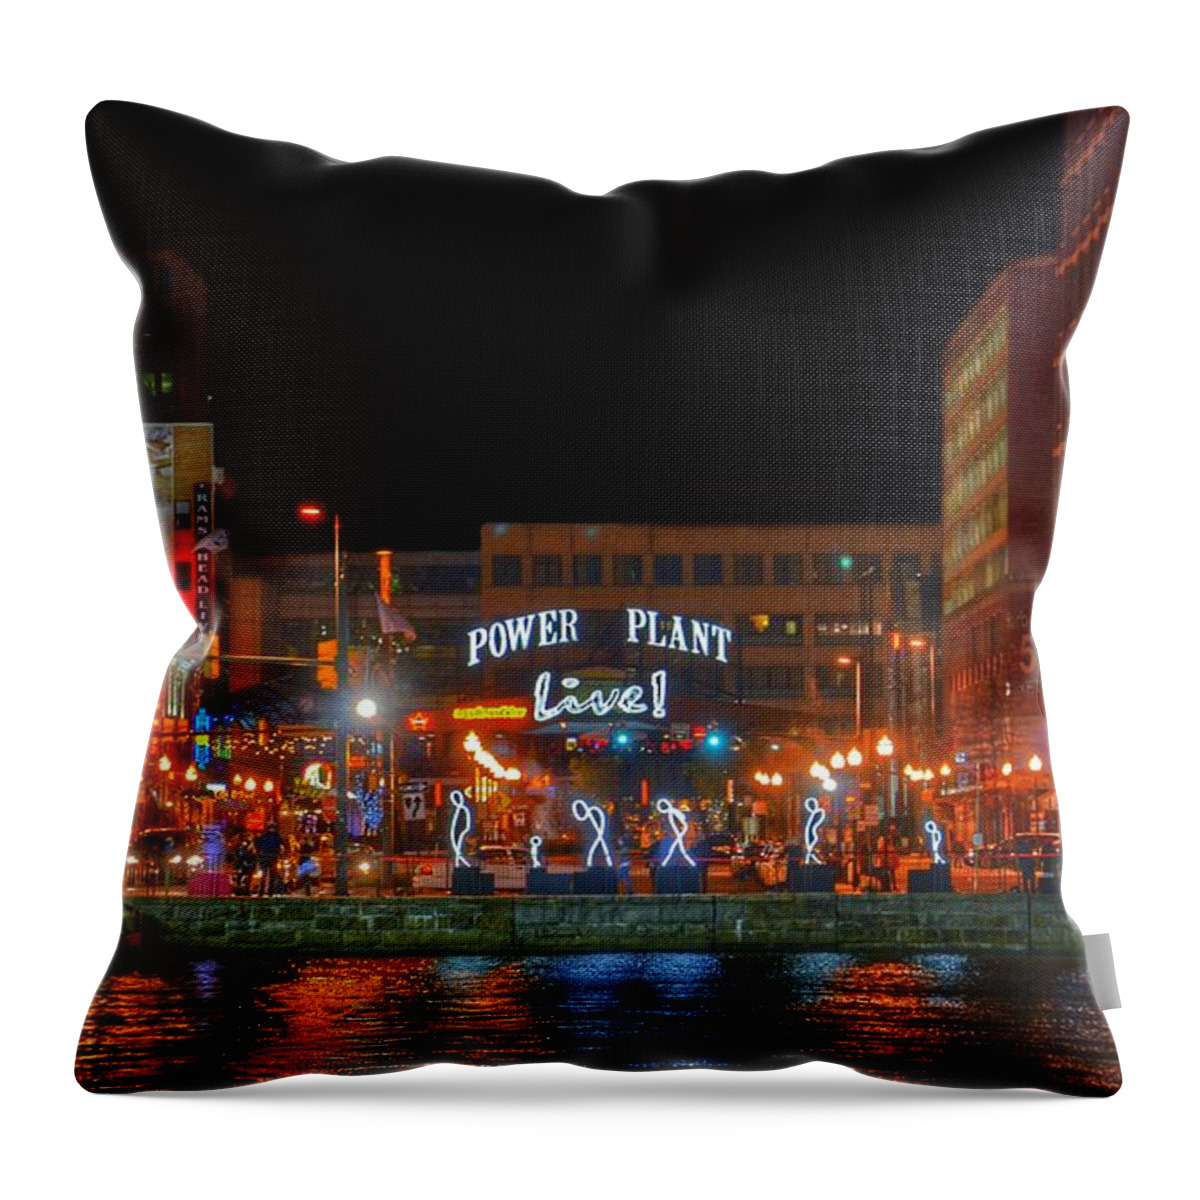 Power Plant Live Throw Pillow featuring the photograph Power Plant Live in Baltimore by Marianna Mills